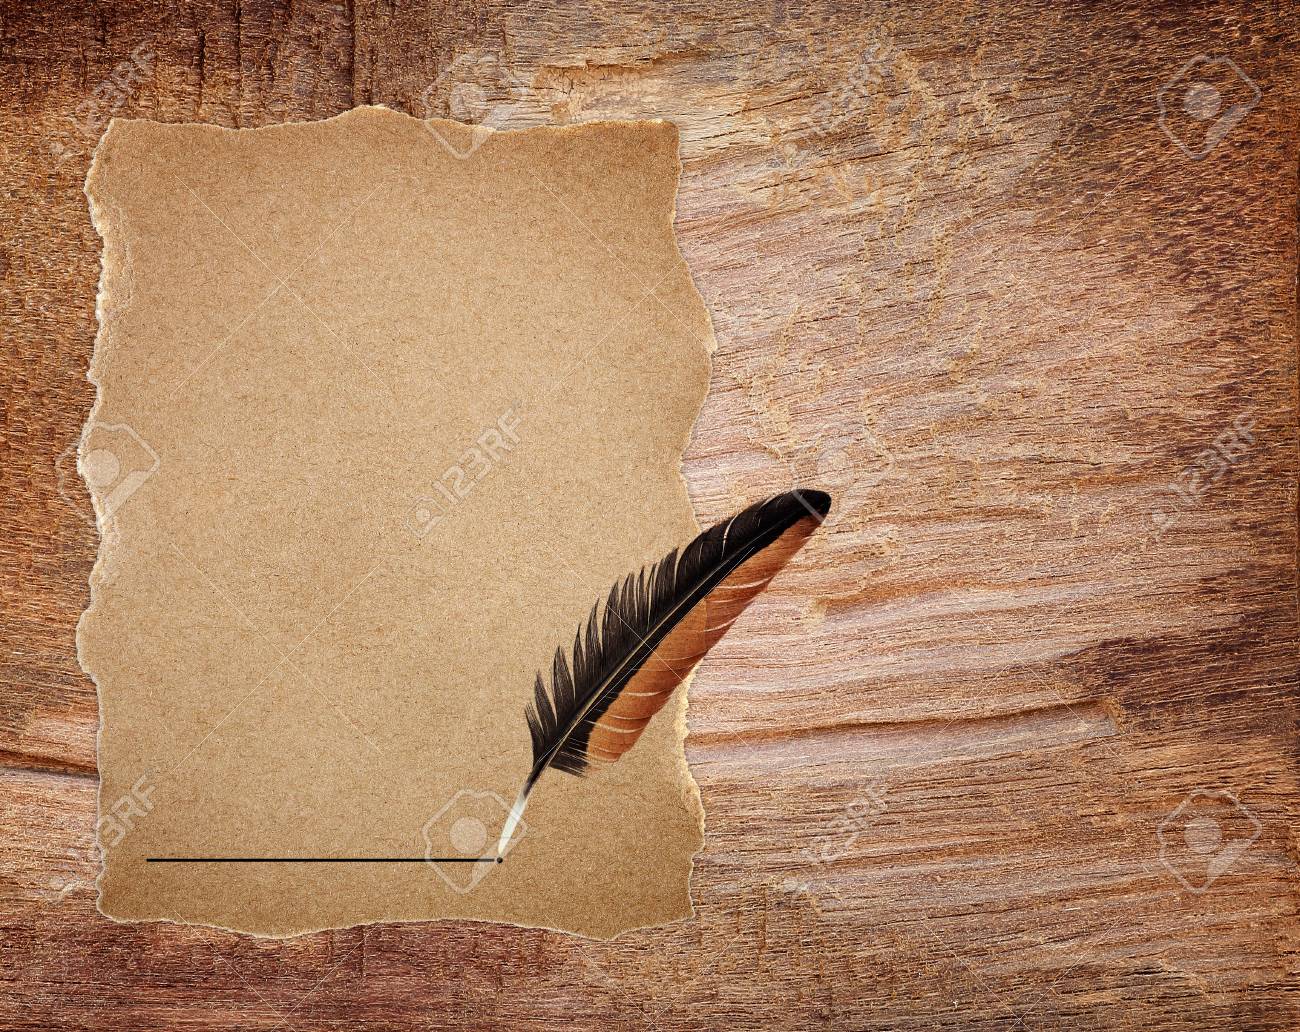 Vintage Background With Quill Pen On Table Stock Photo Picture